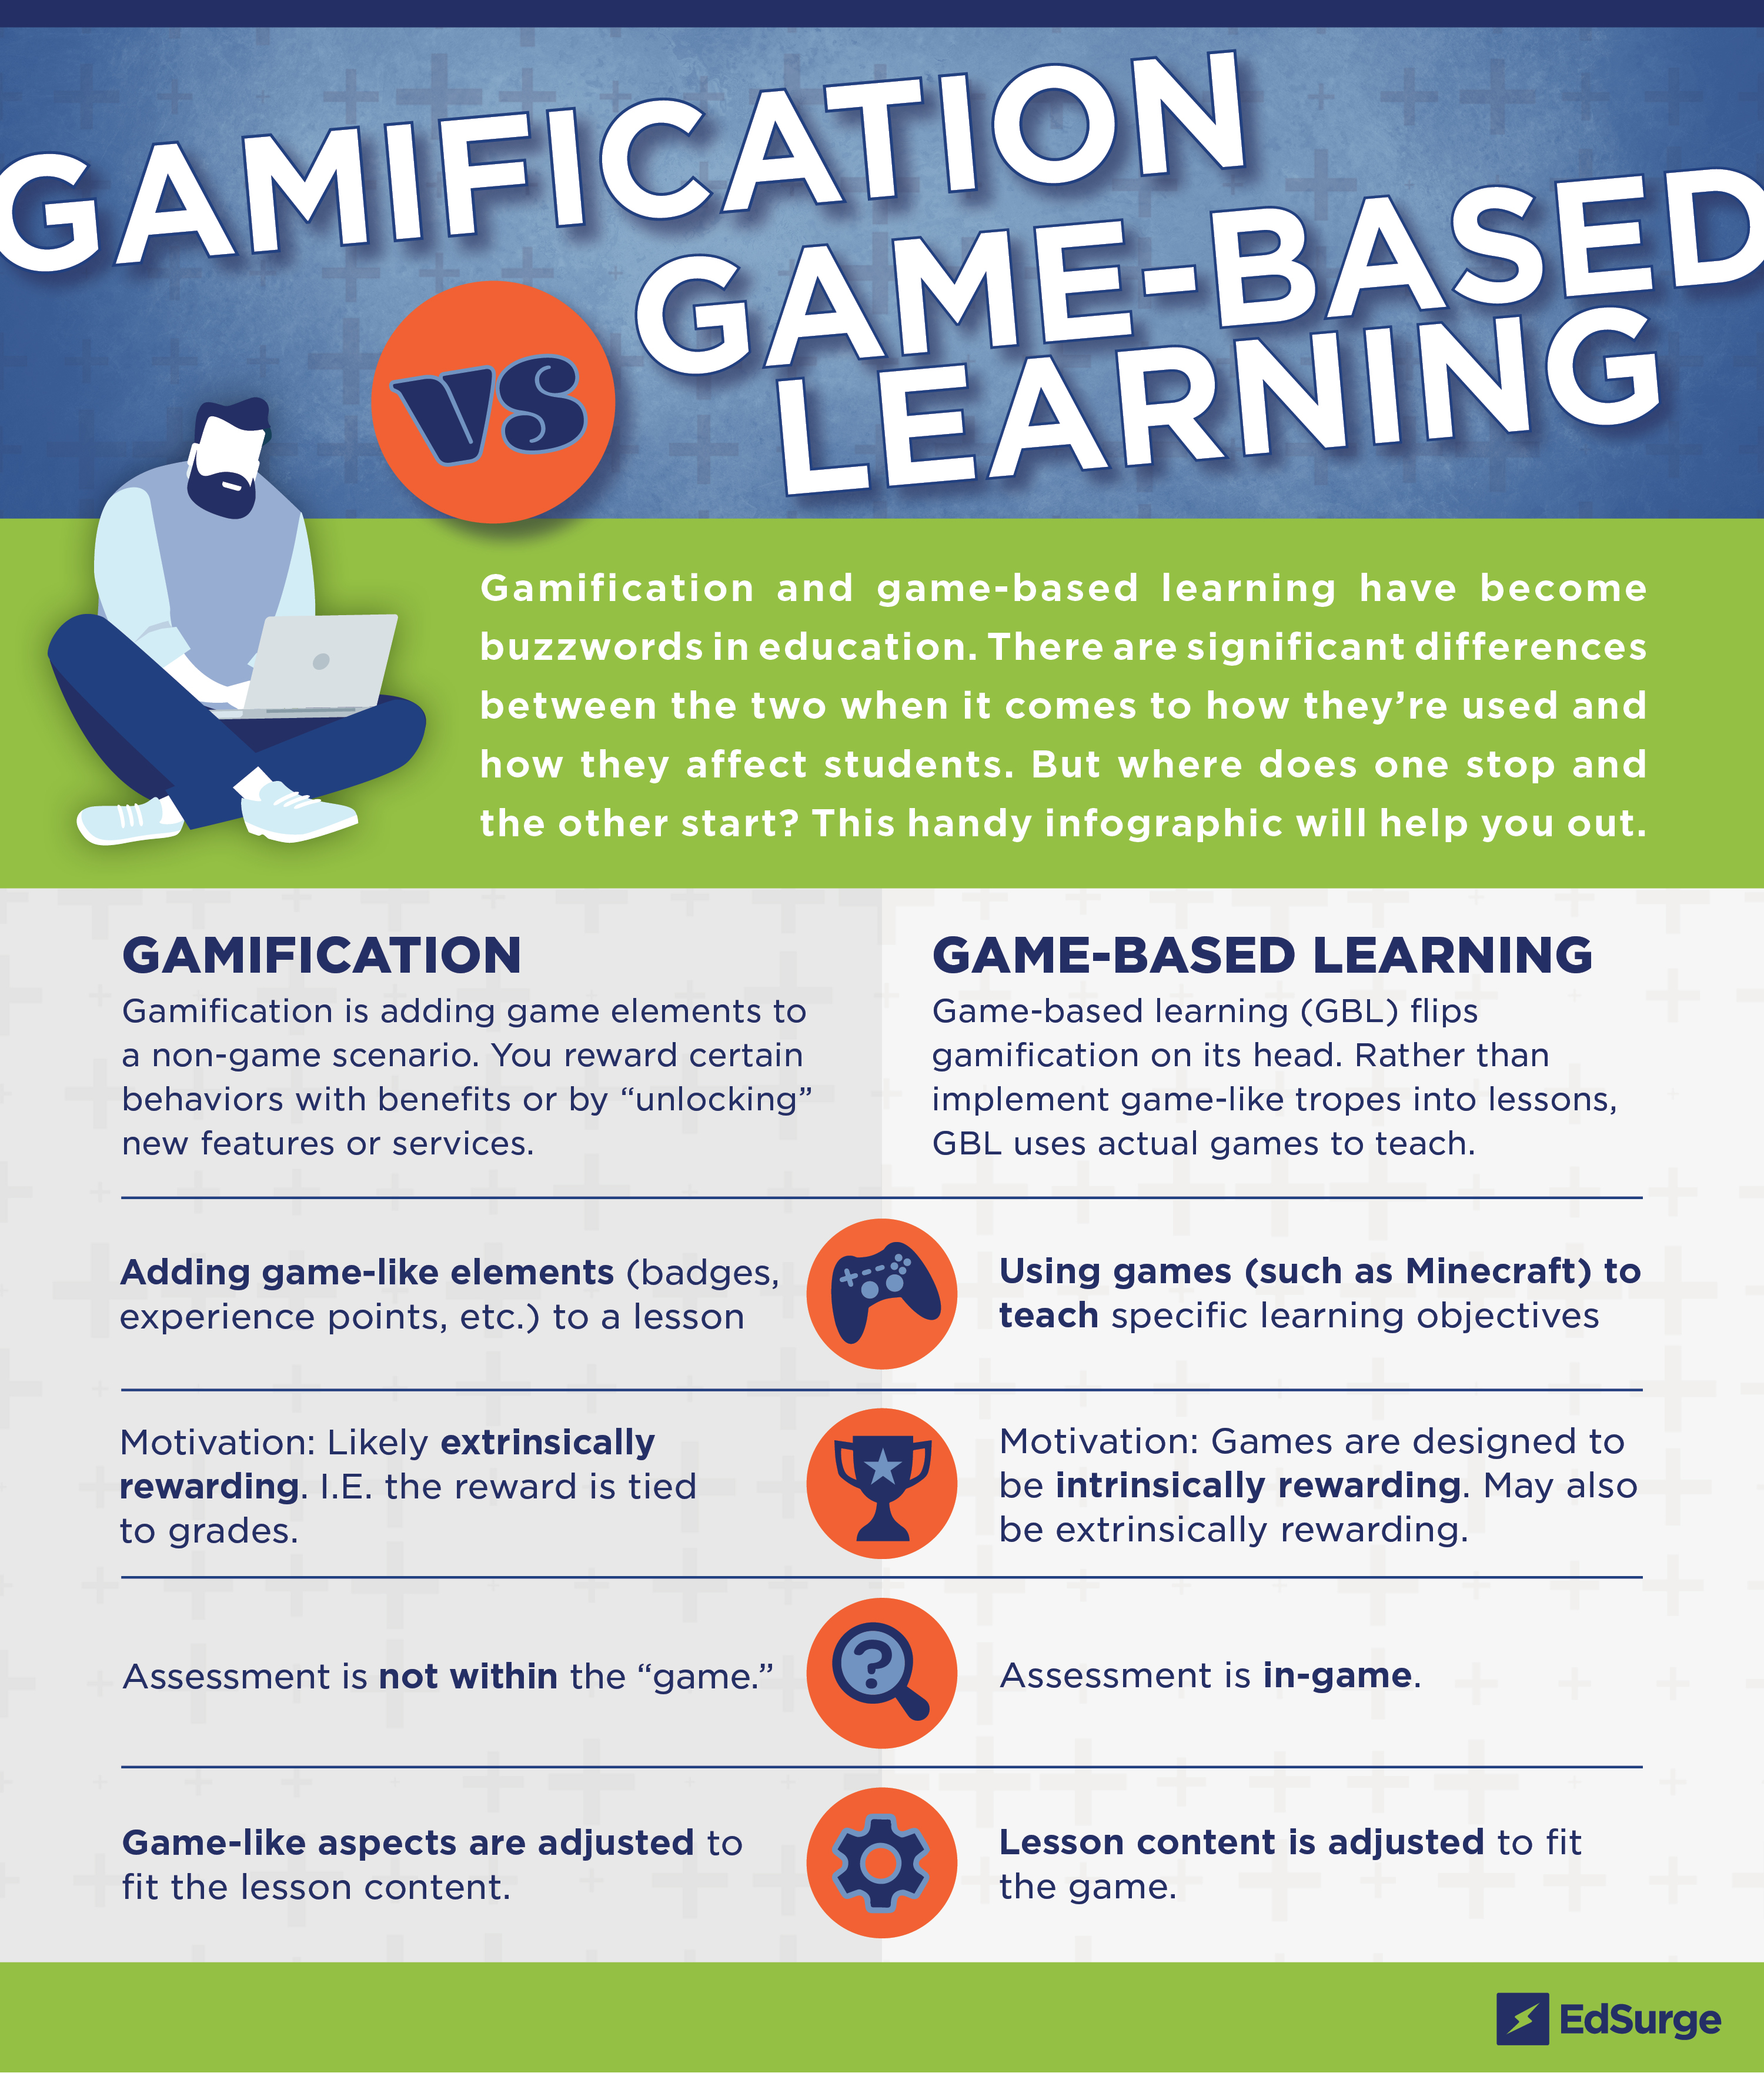 How Game-Based Learning Develops Real-World Skills